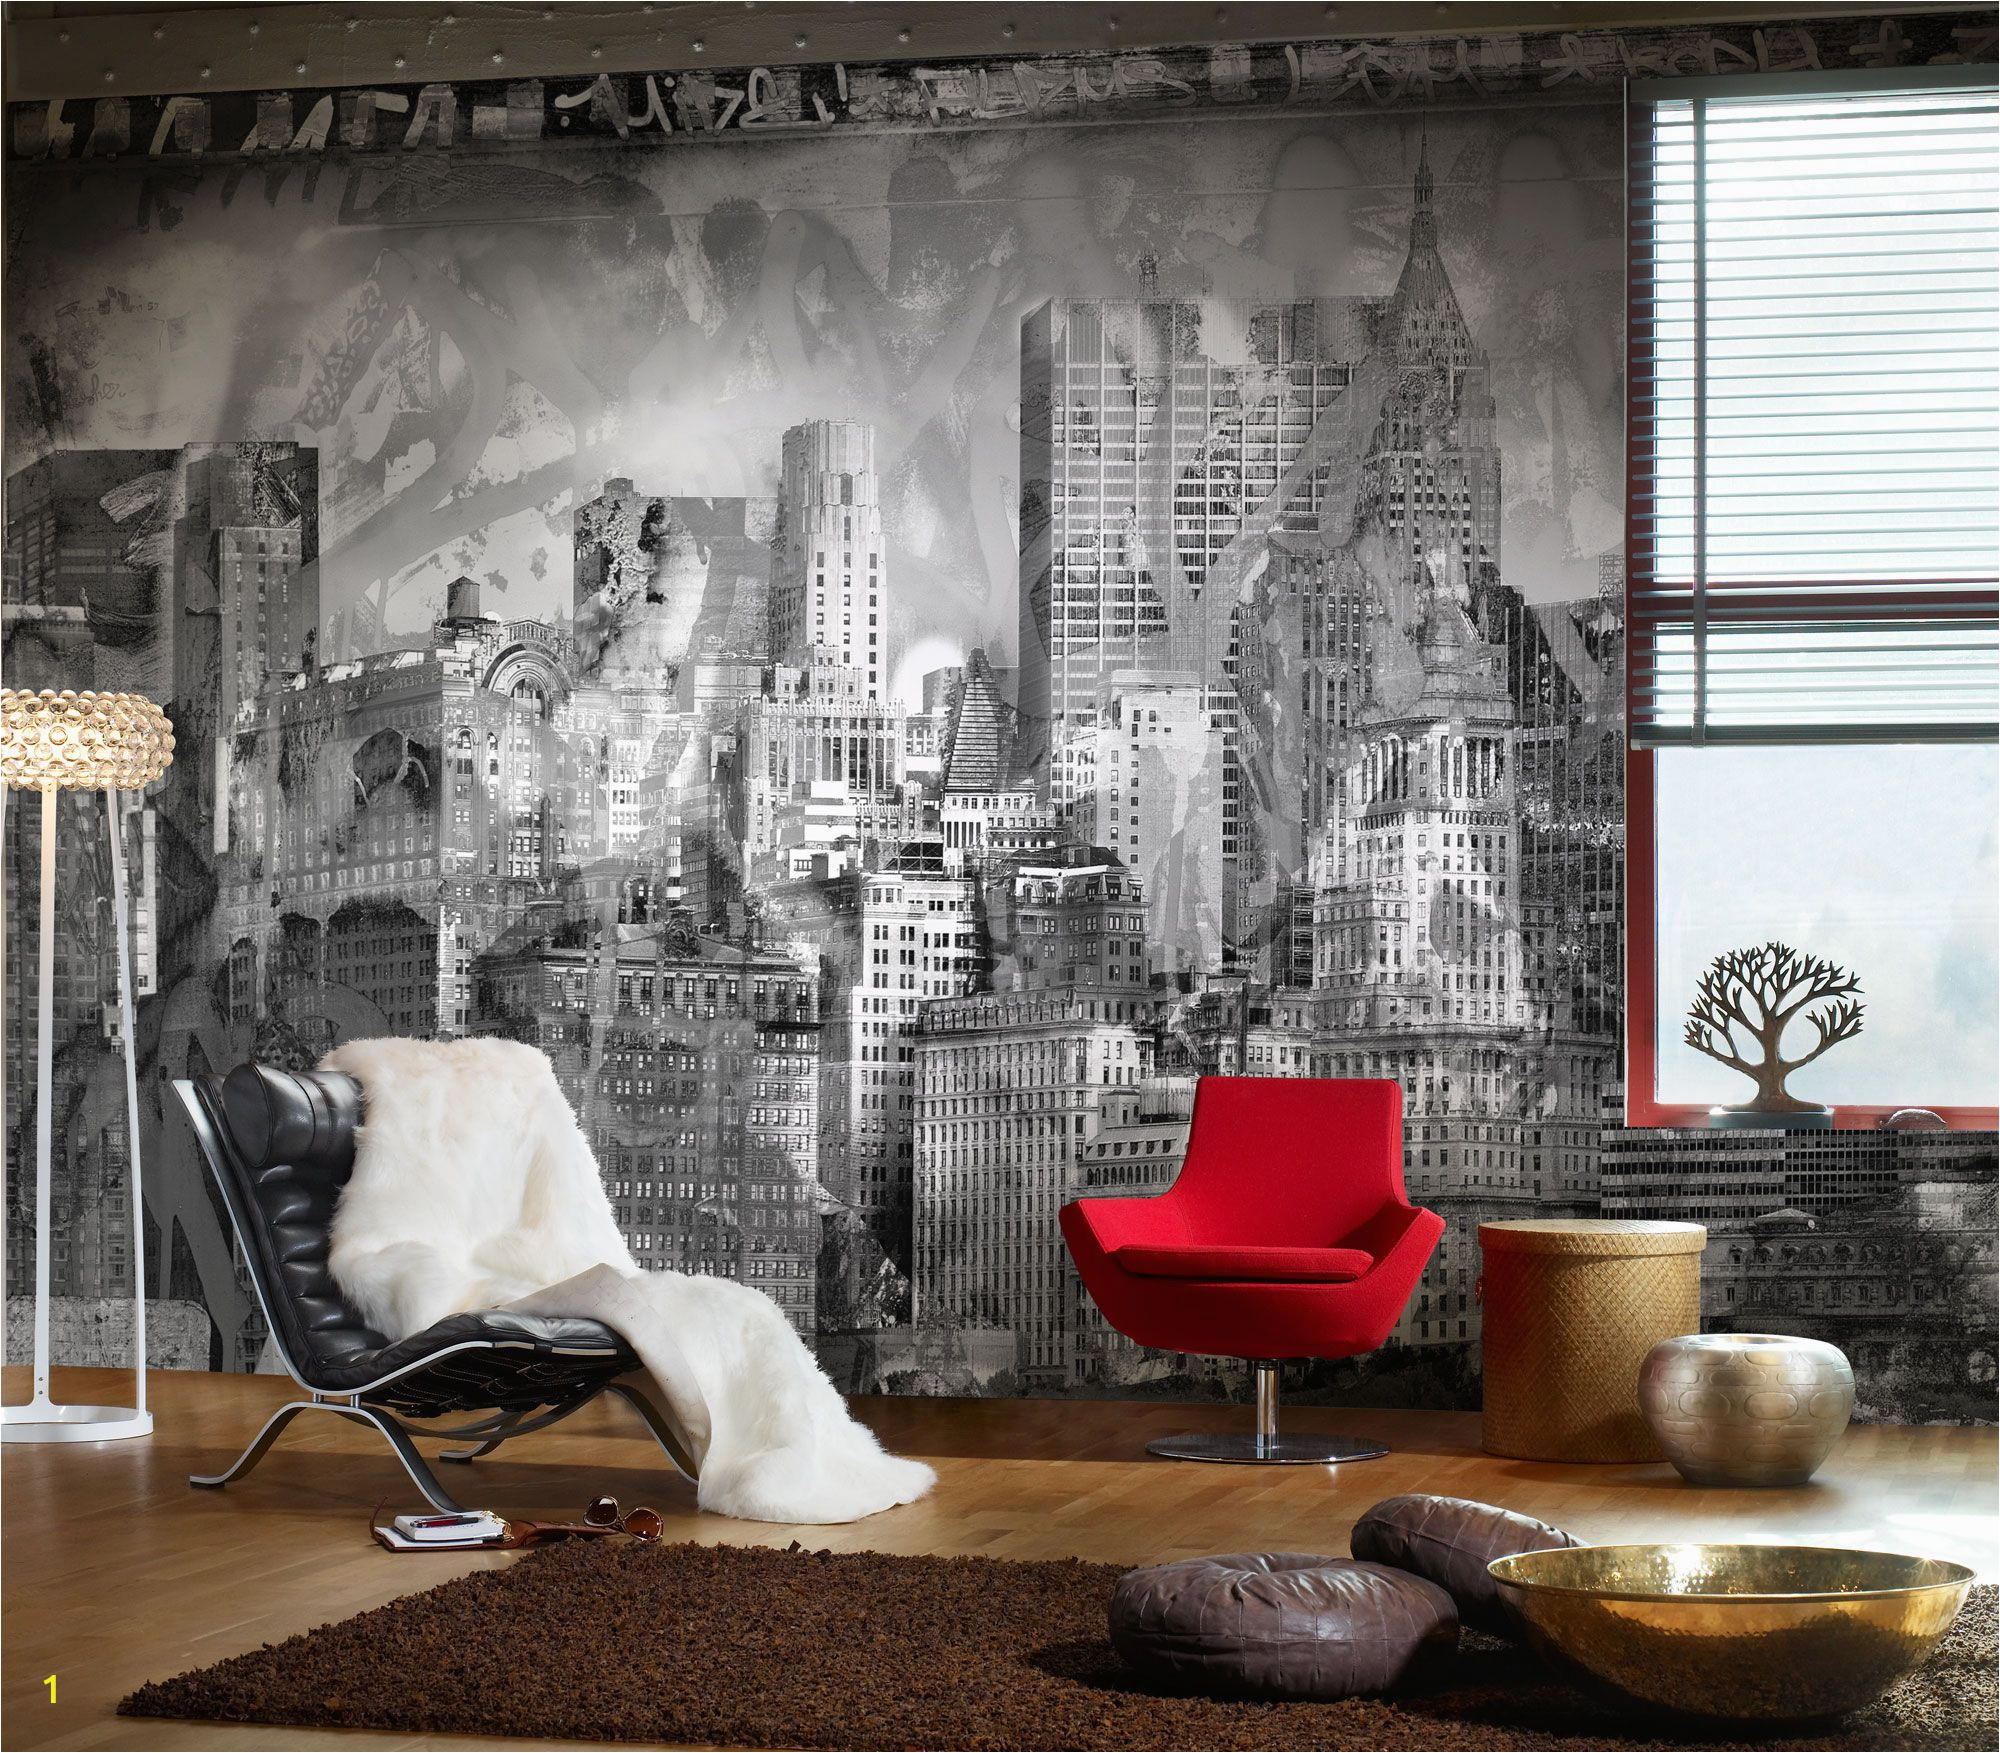 City Wall Murals Black and White Graffiti City Probably the Most Iconic Graffit Wallpaper